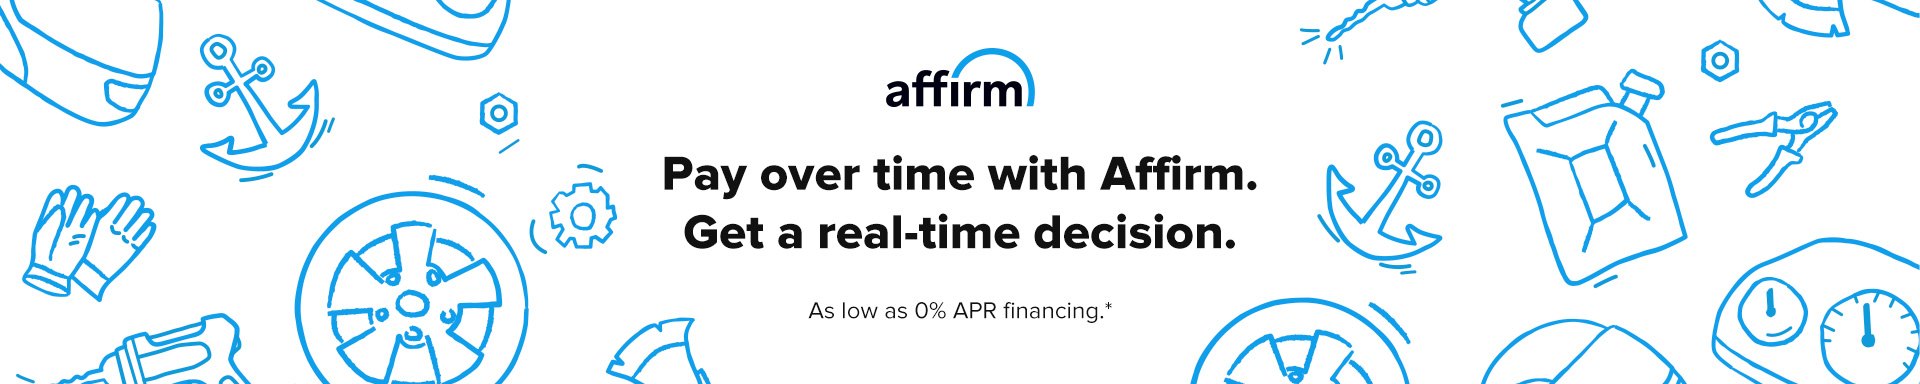 Affirm | Easy Financing | Pay Later with Affirm - CAMPERiD.com